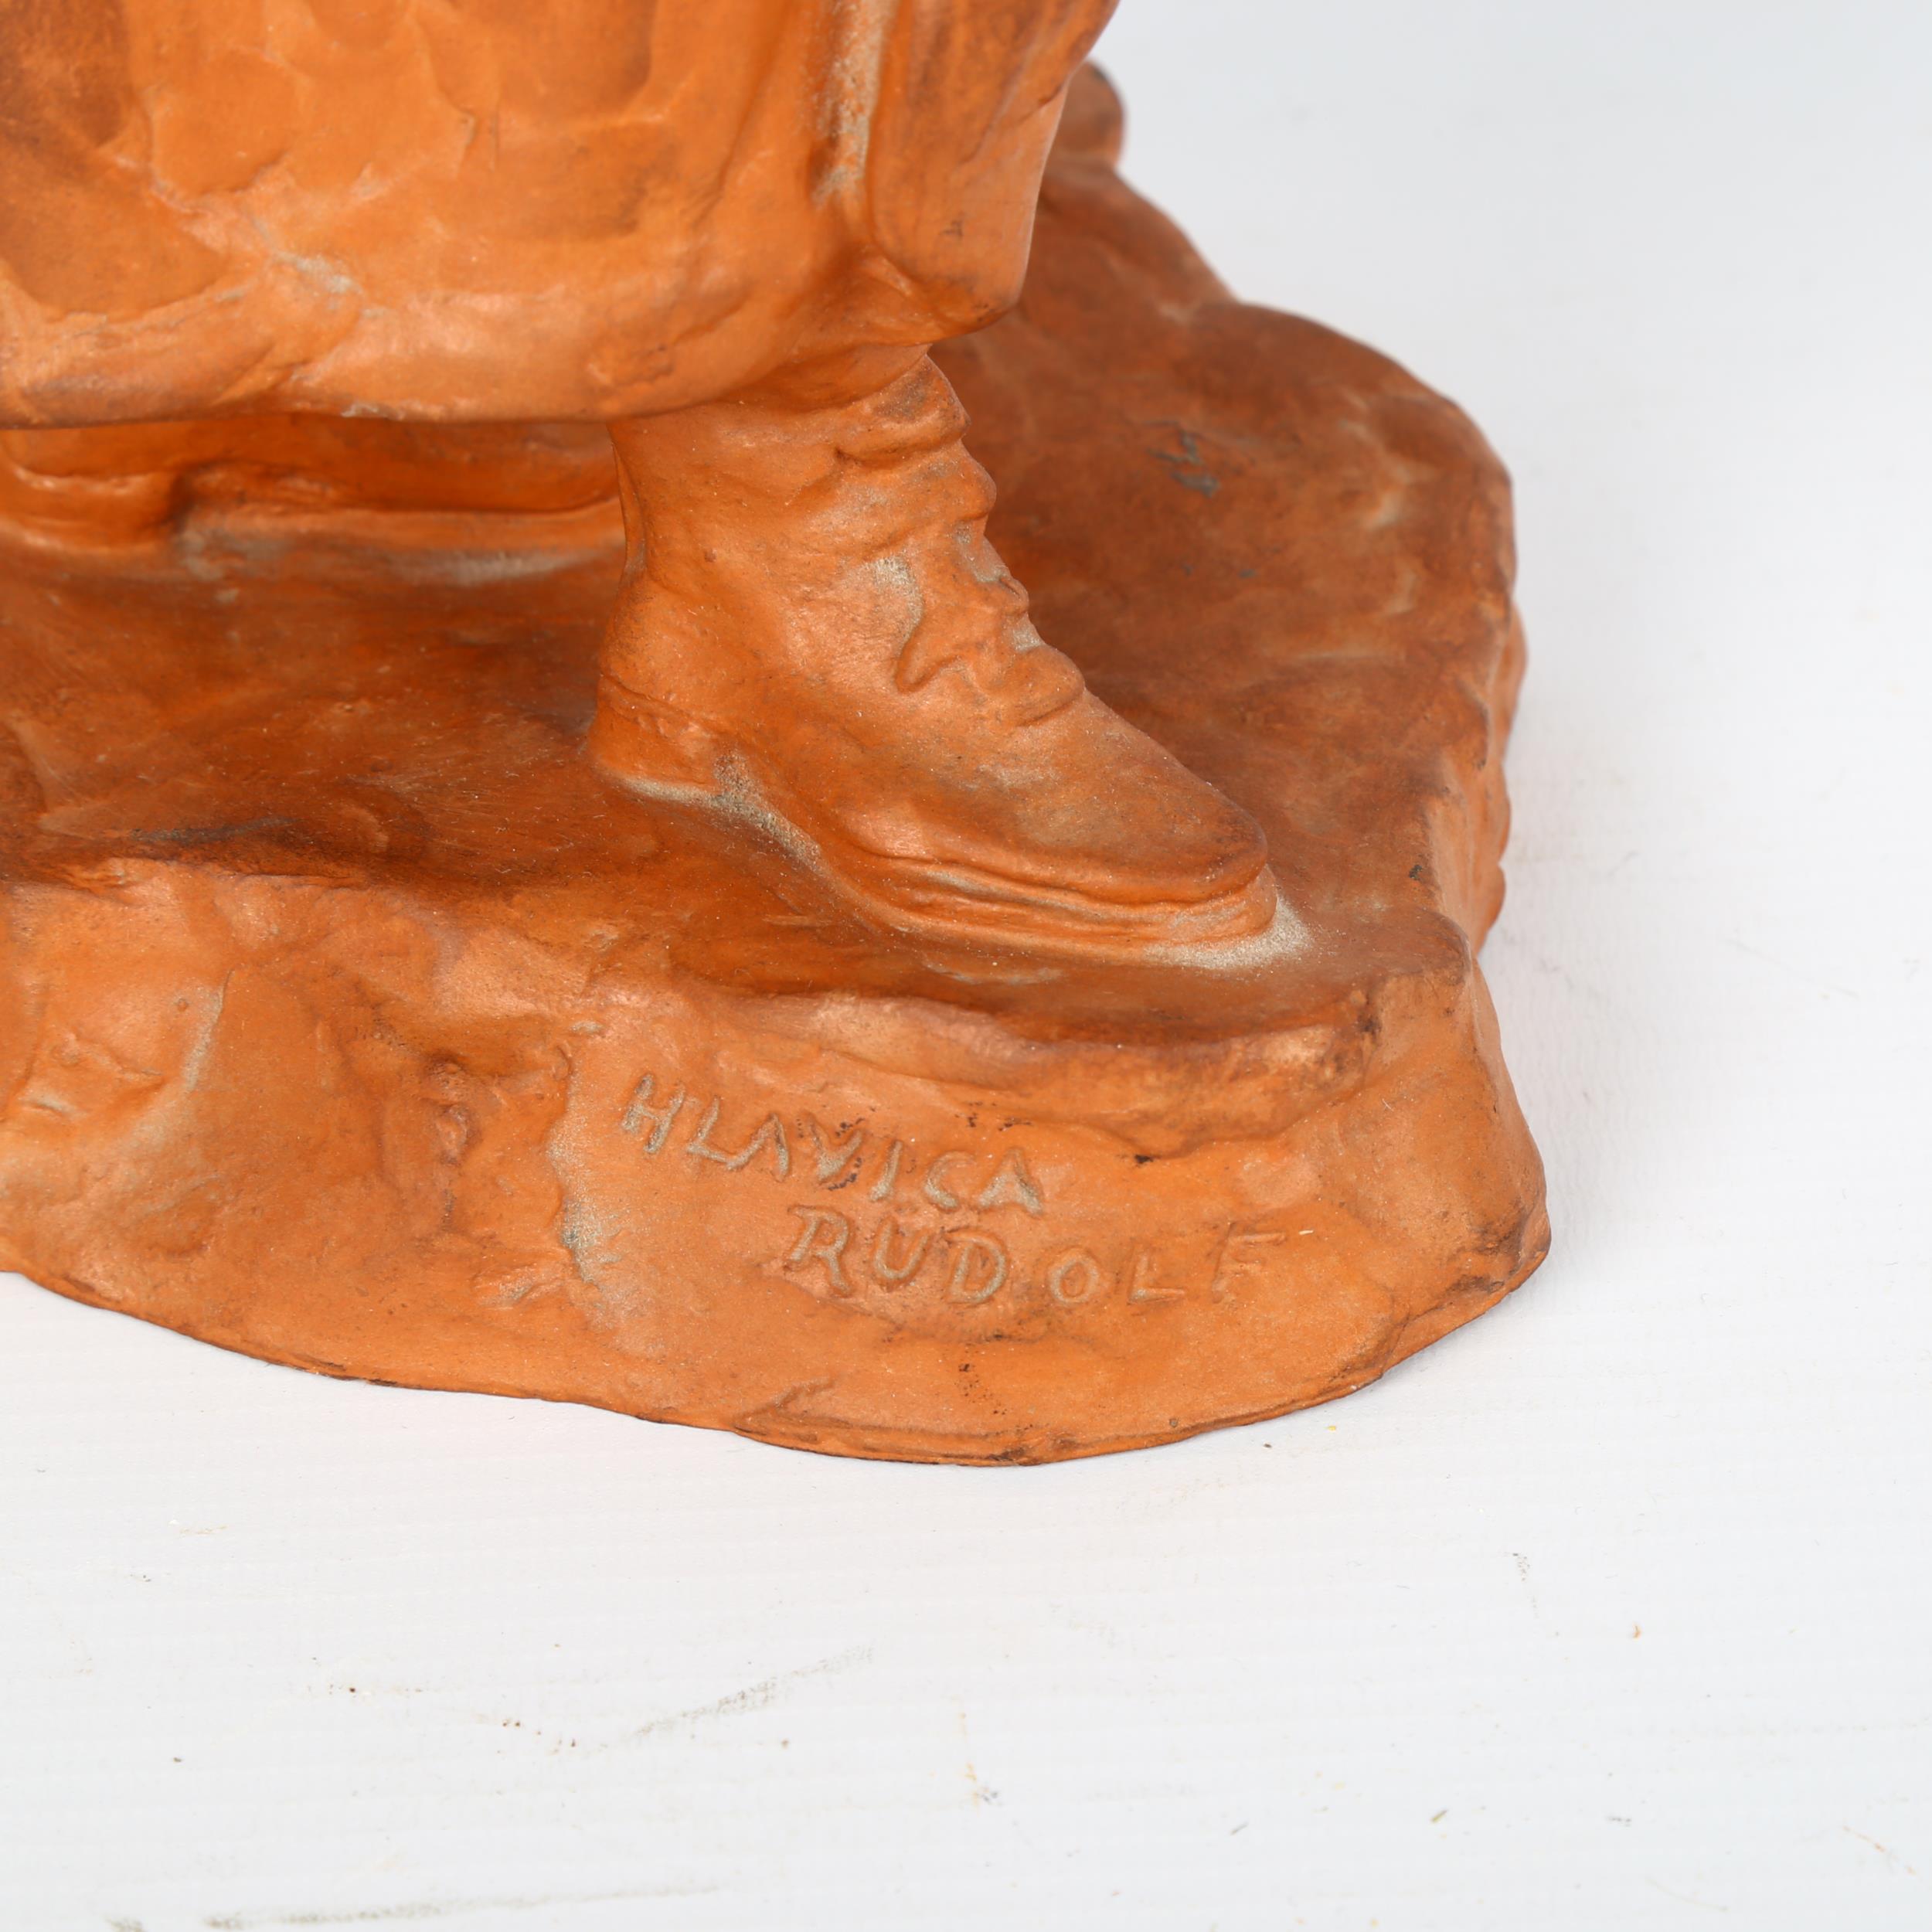 RUDOLF HLAVICA, (1897-1971), a terracotta pottery sculpture of a soldier by Pexider, Czechoslovakia, - Image 3 of 3